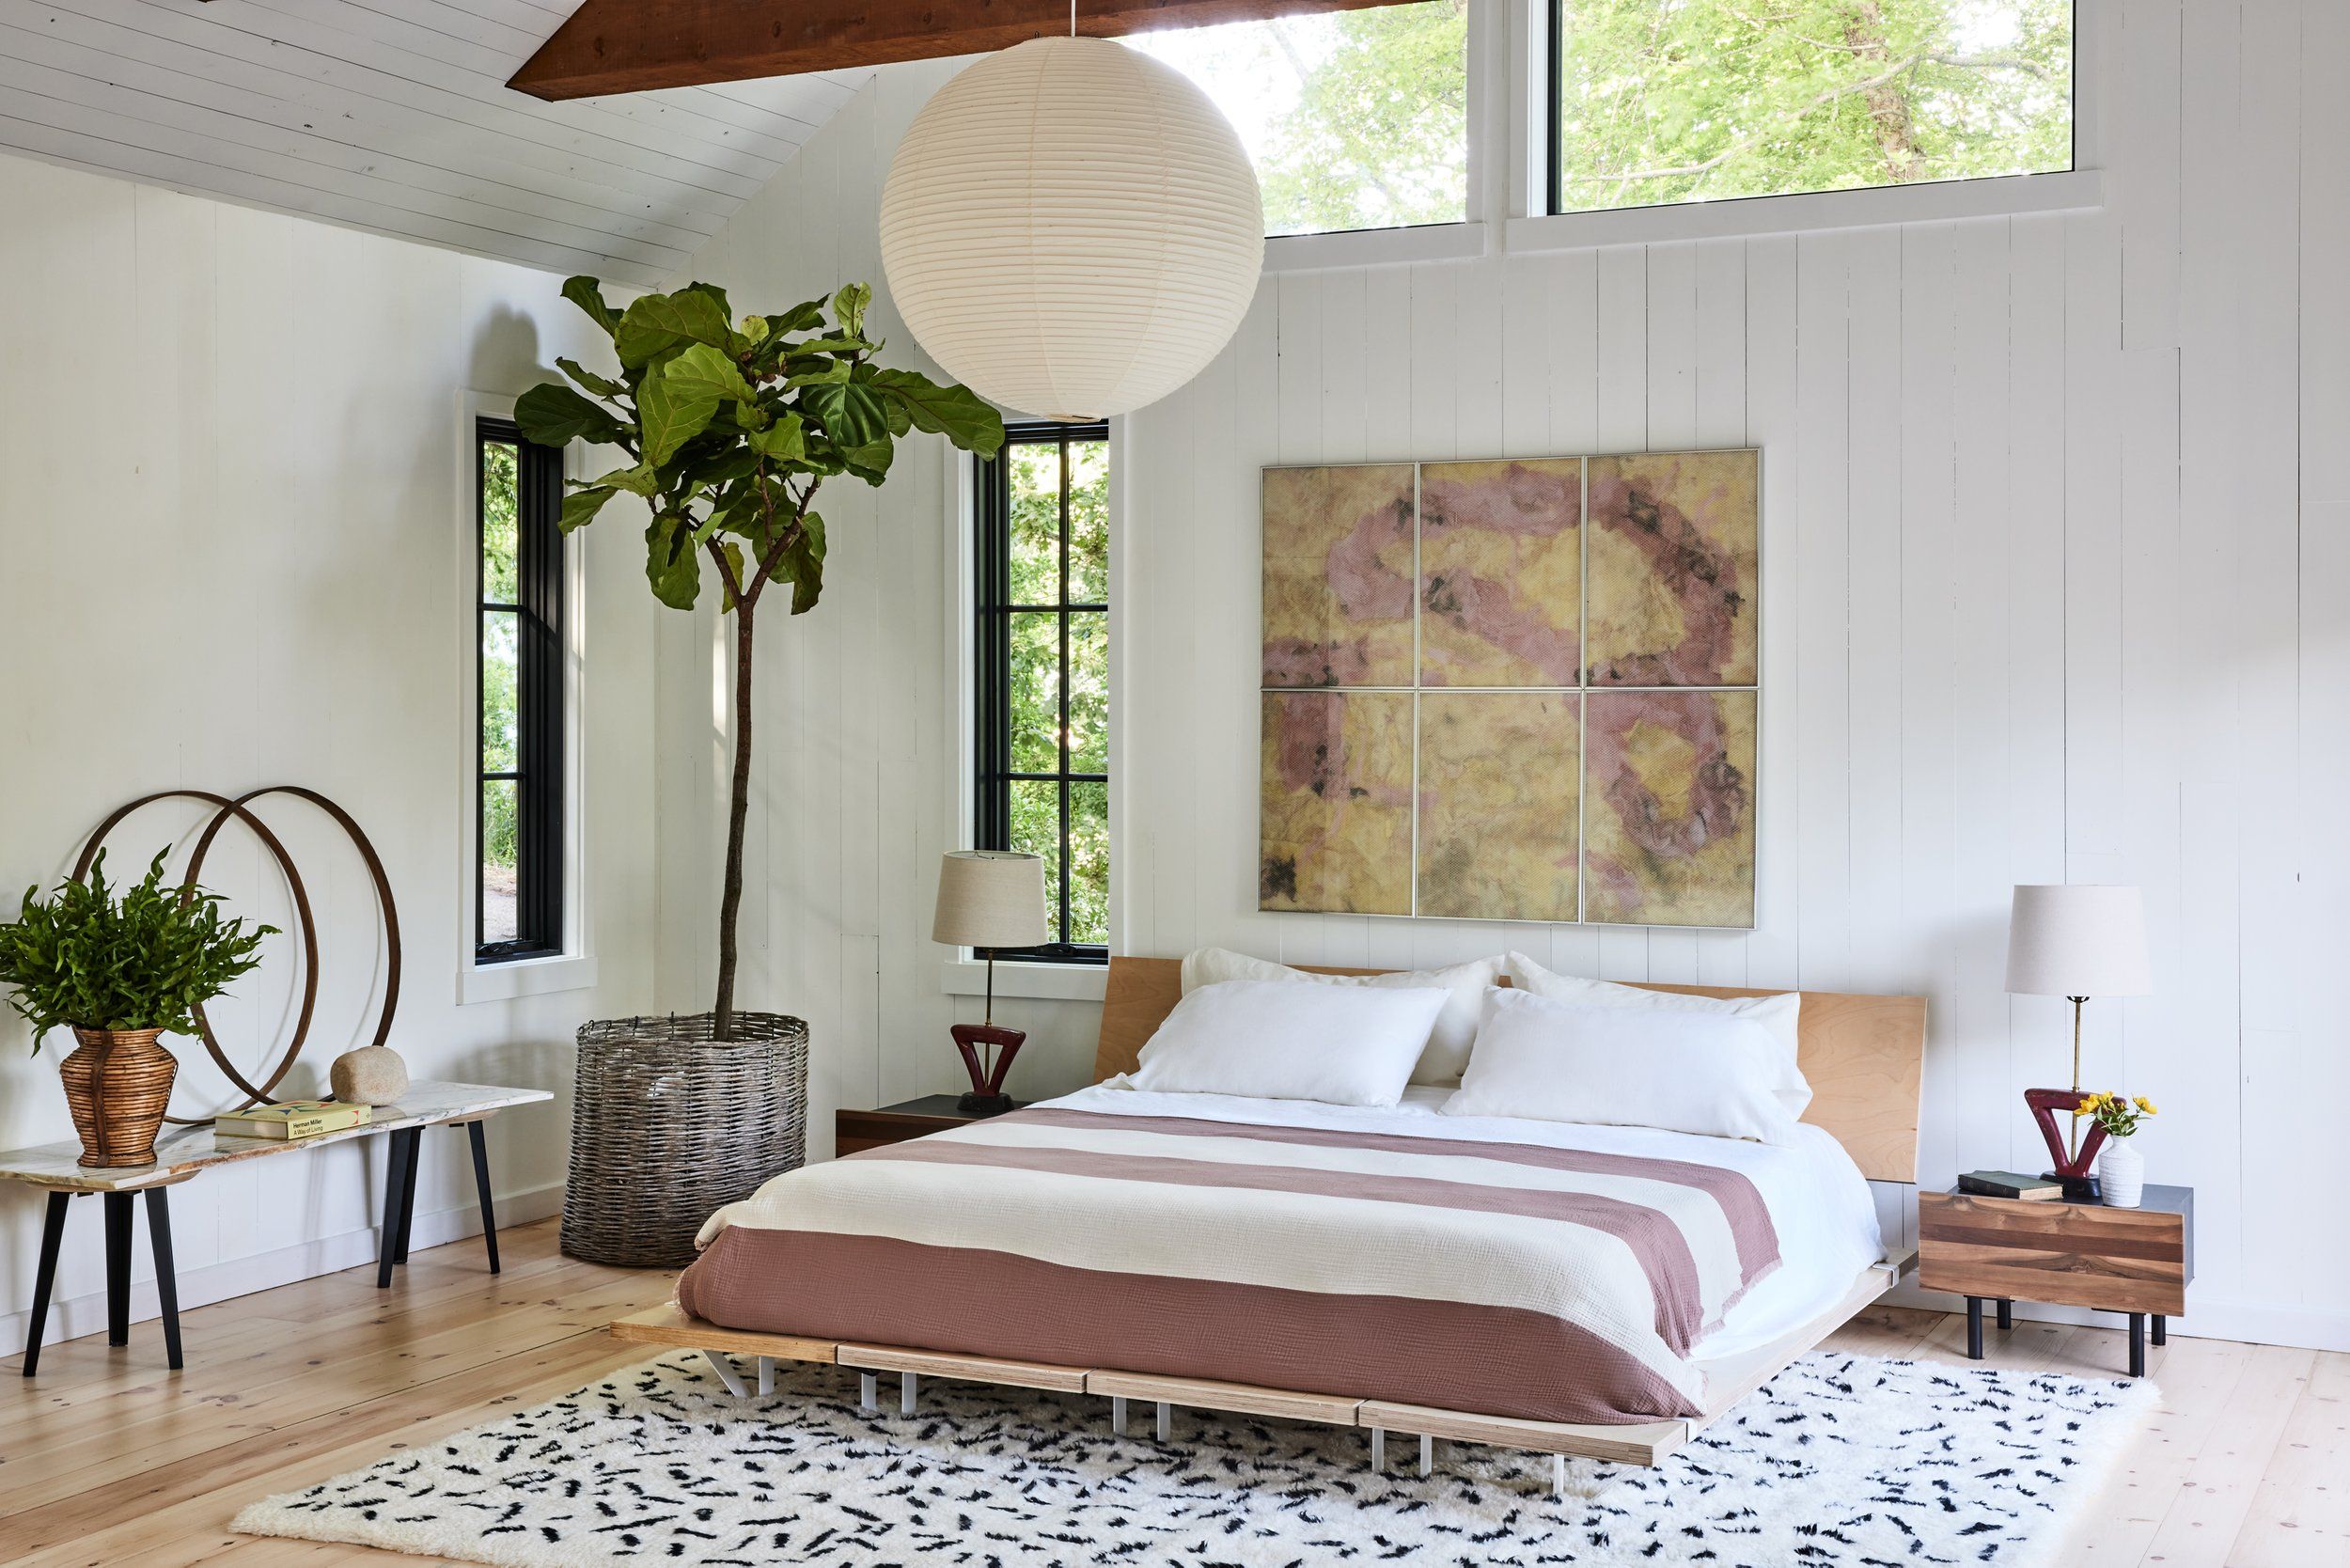 19 Best Neutral Bedroom Ideas and Color Schemes